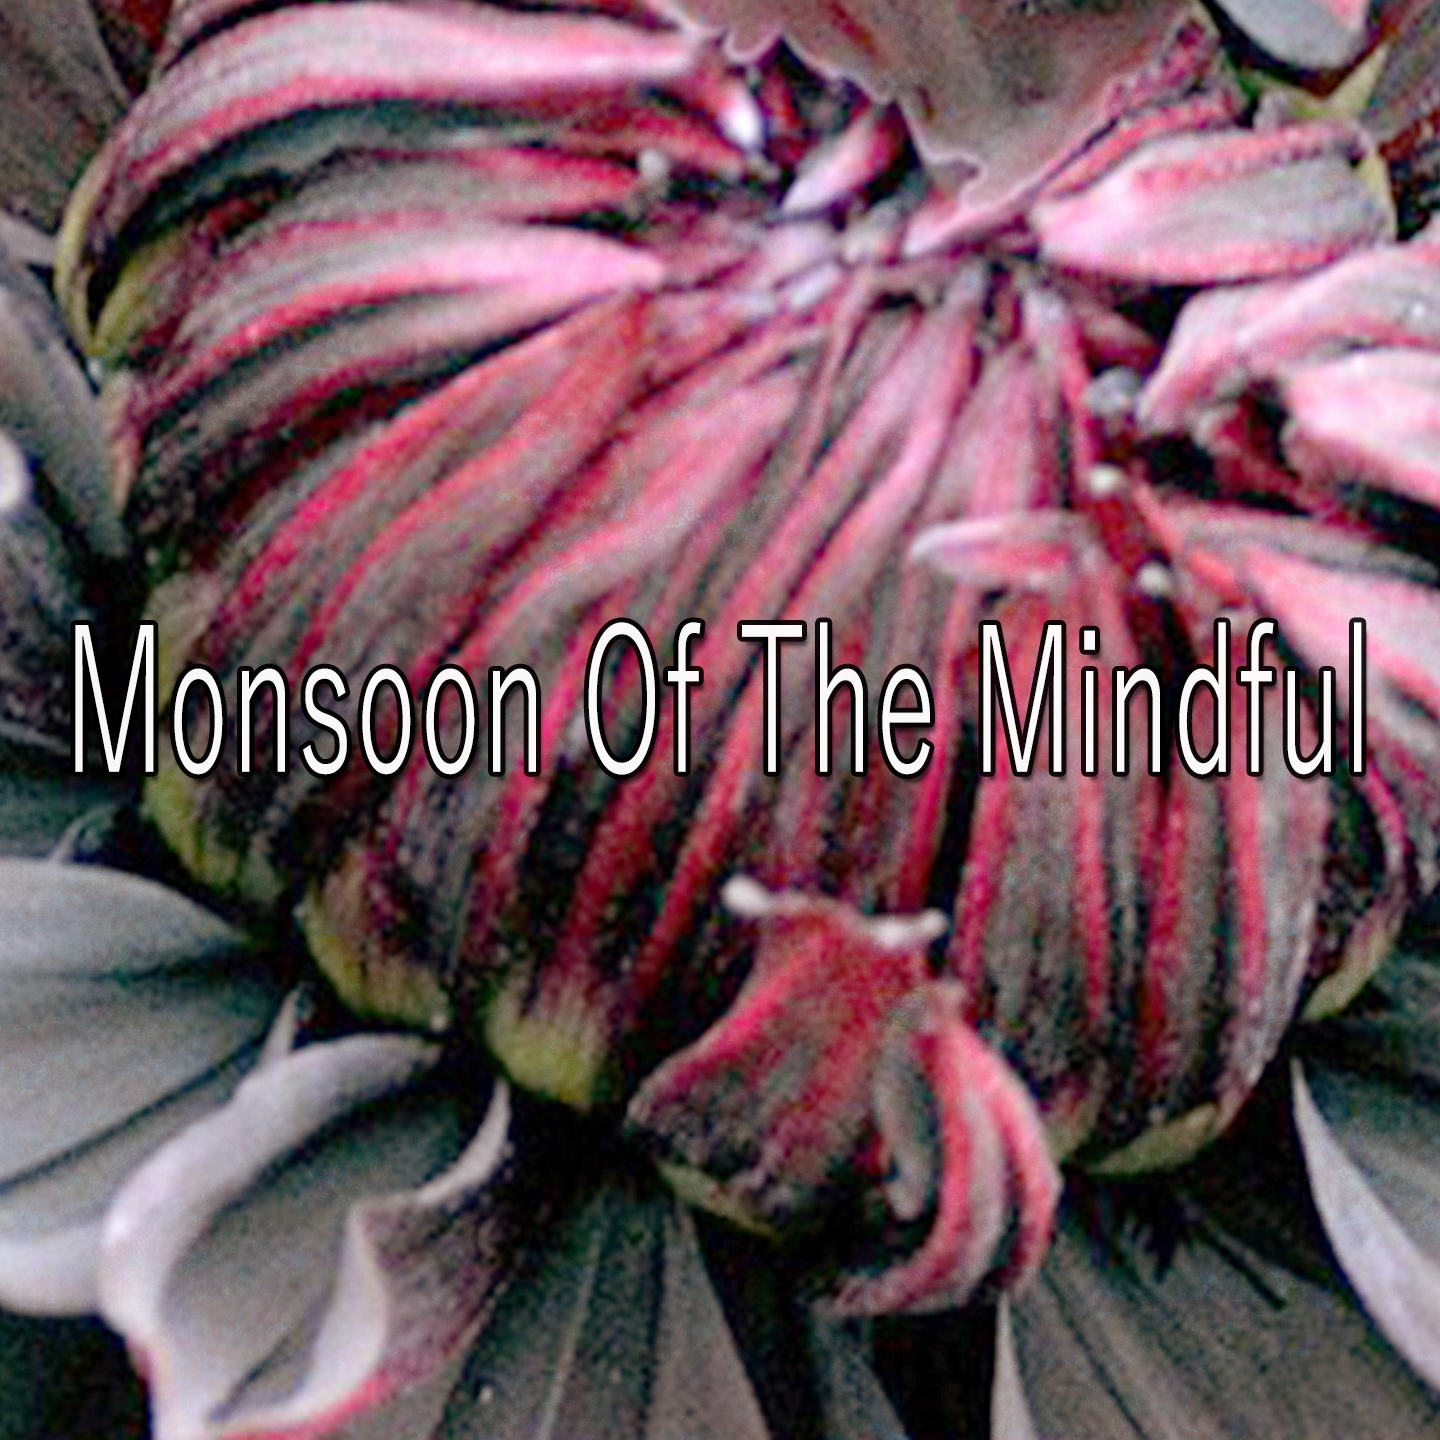 Monsoon Of The Mindful